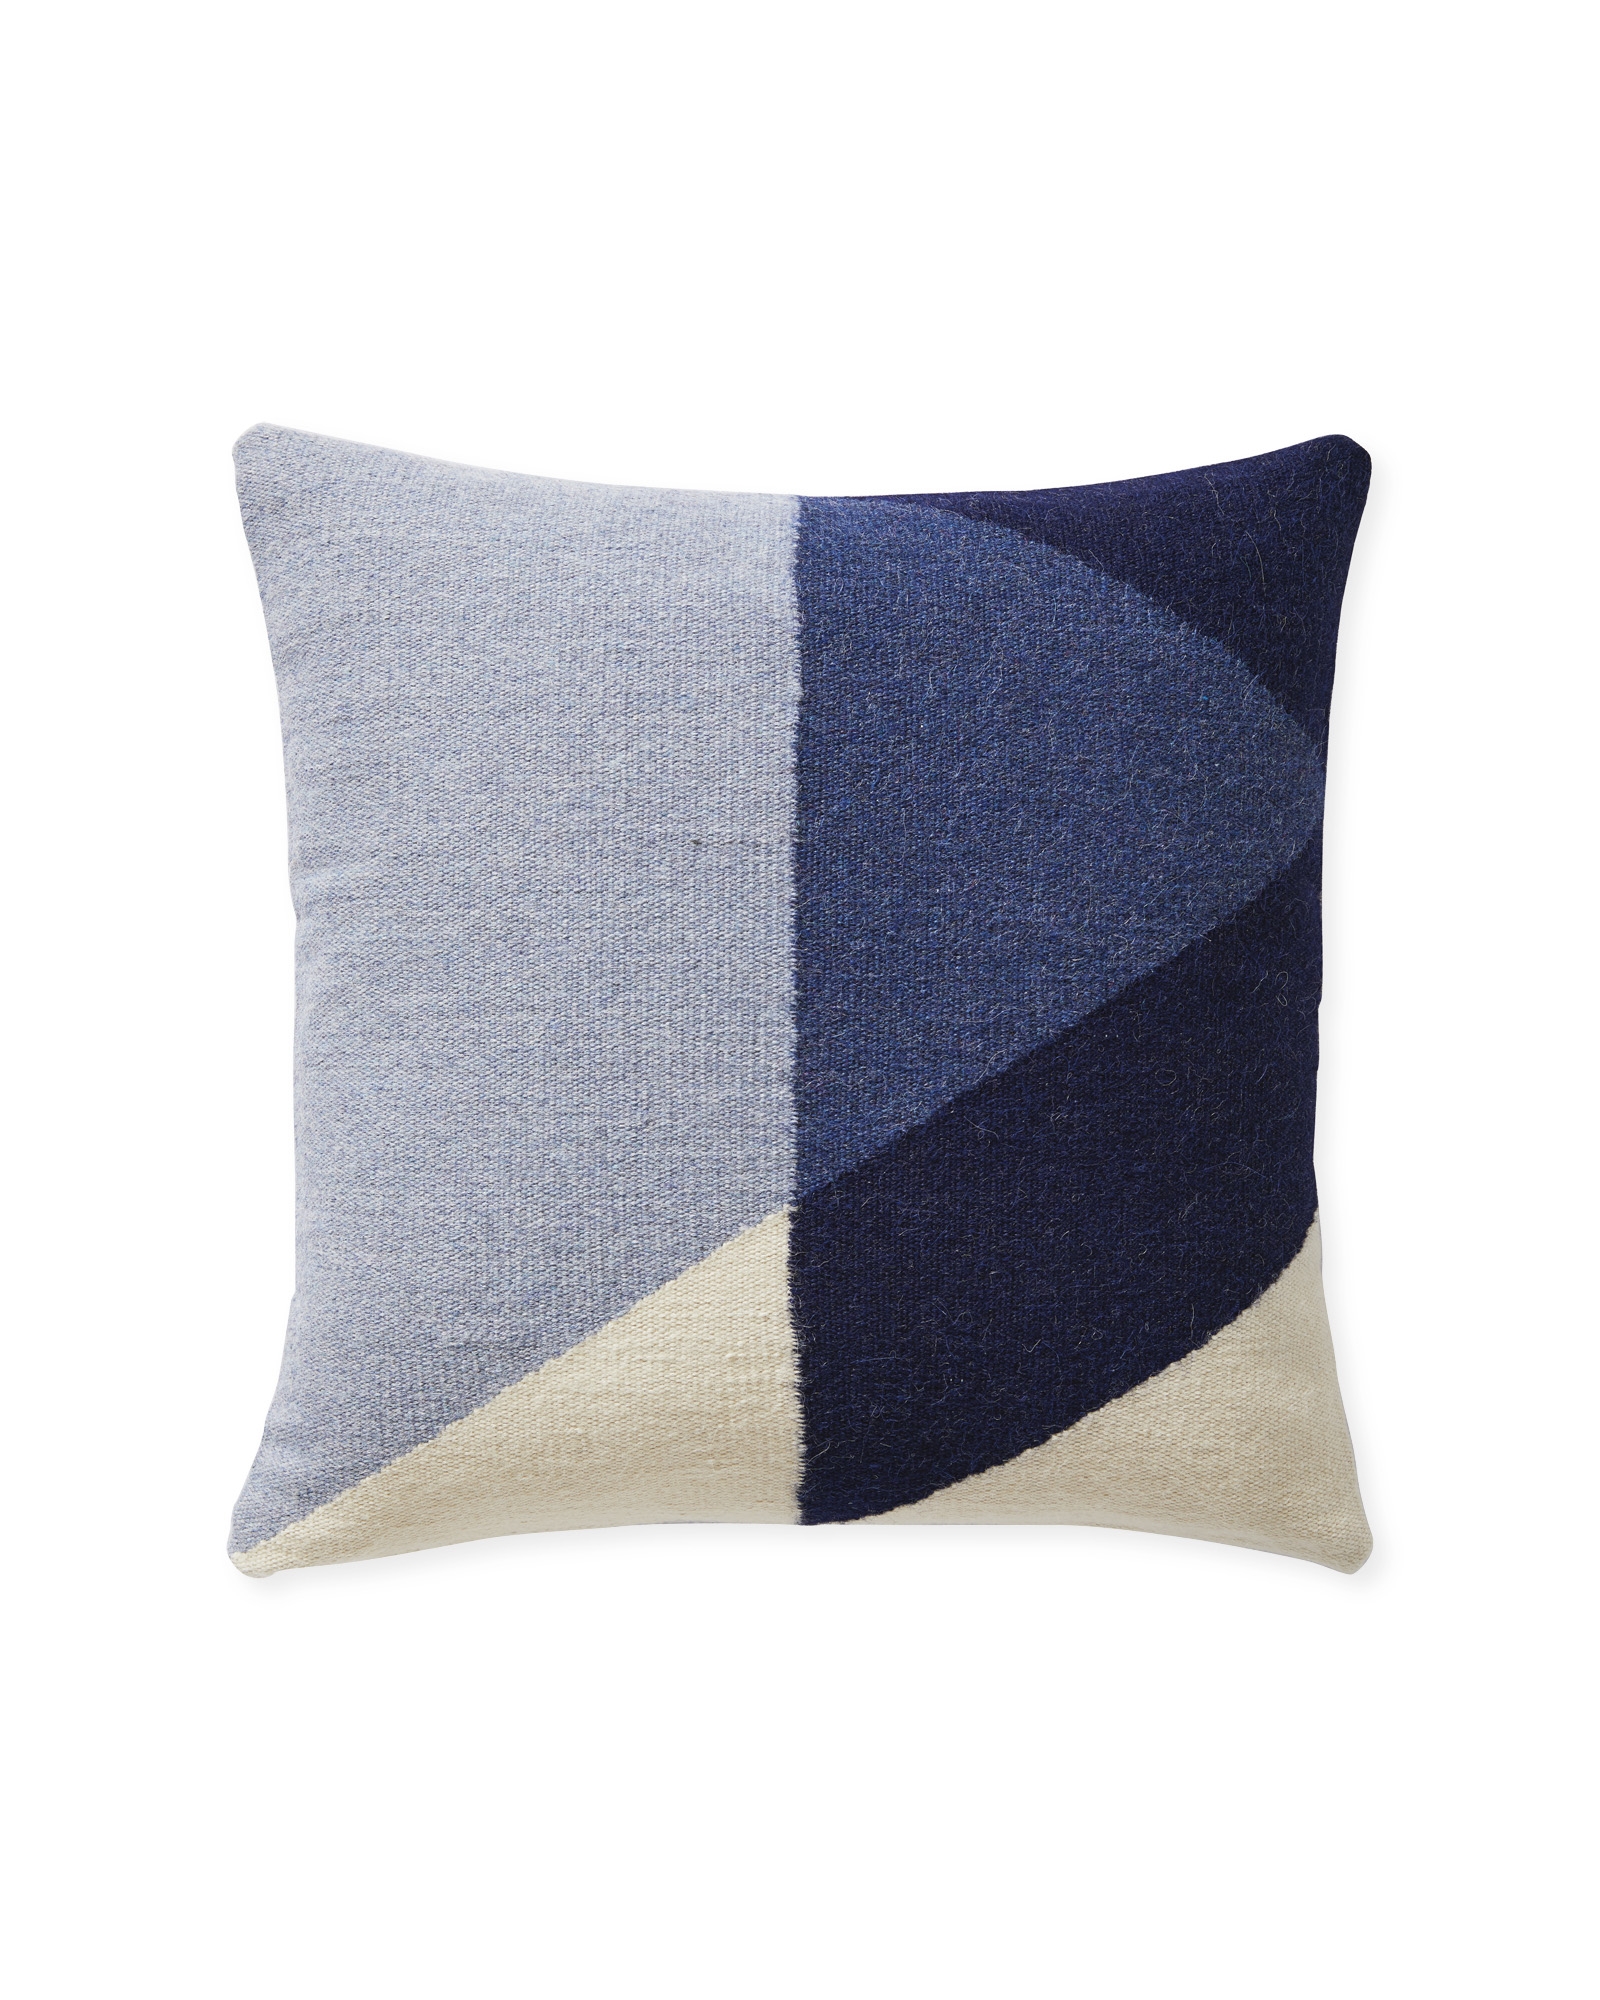 Francis Pillow Cover - Navy - Insert sold separately - Image 0